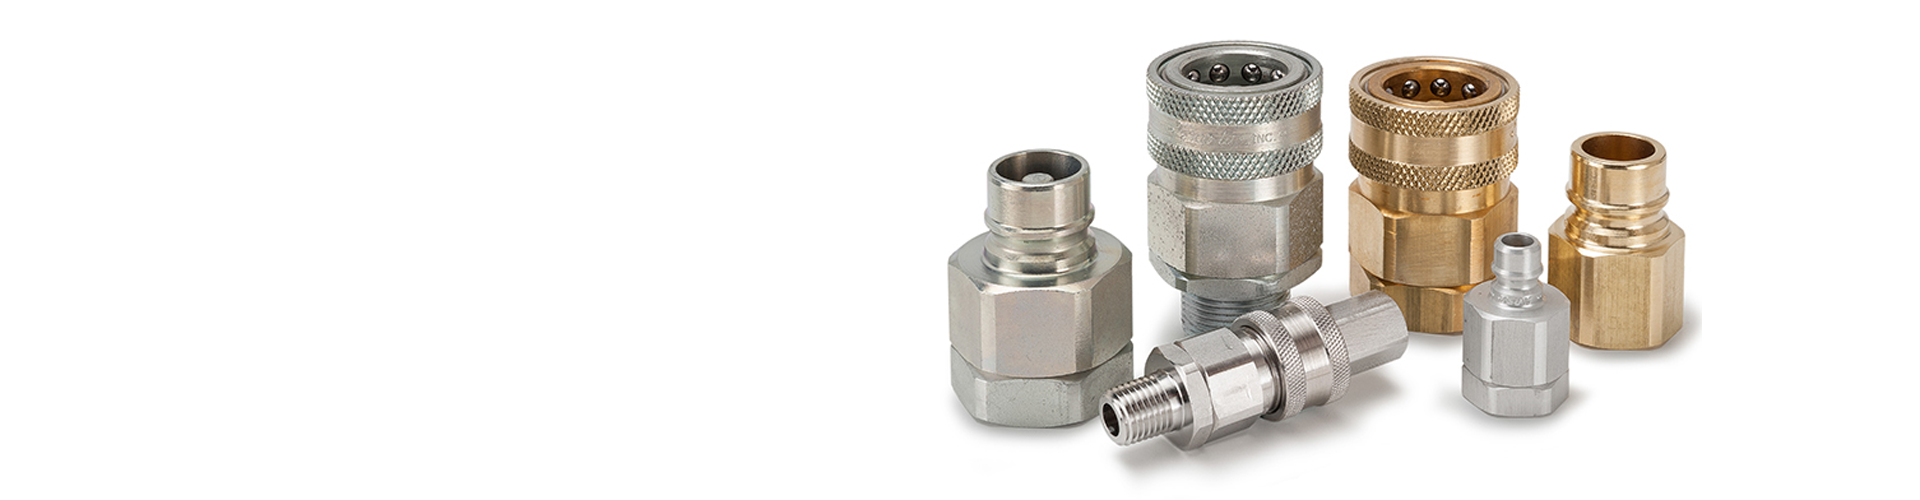 Quick Connect Couplings in Stock